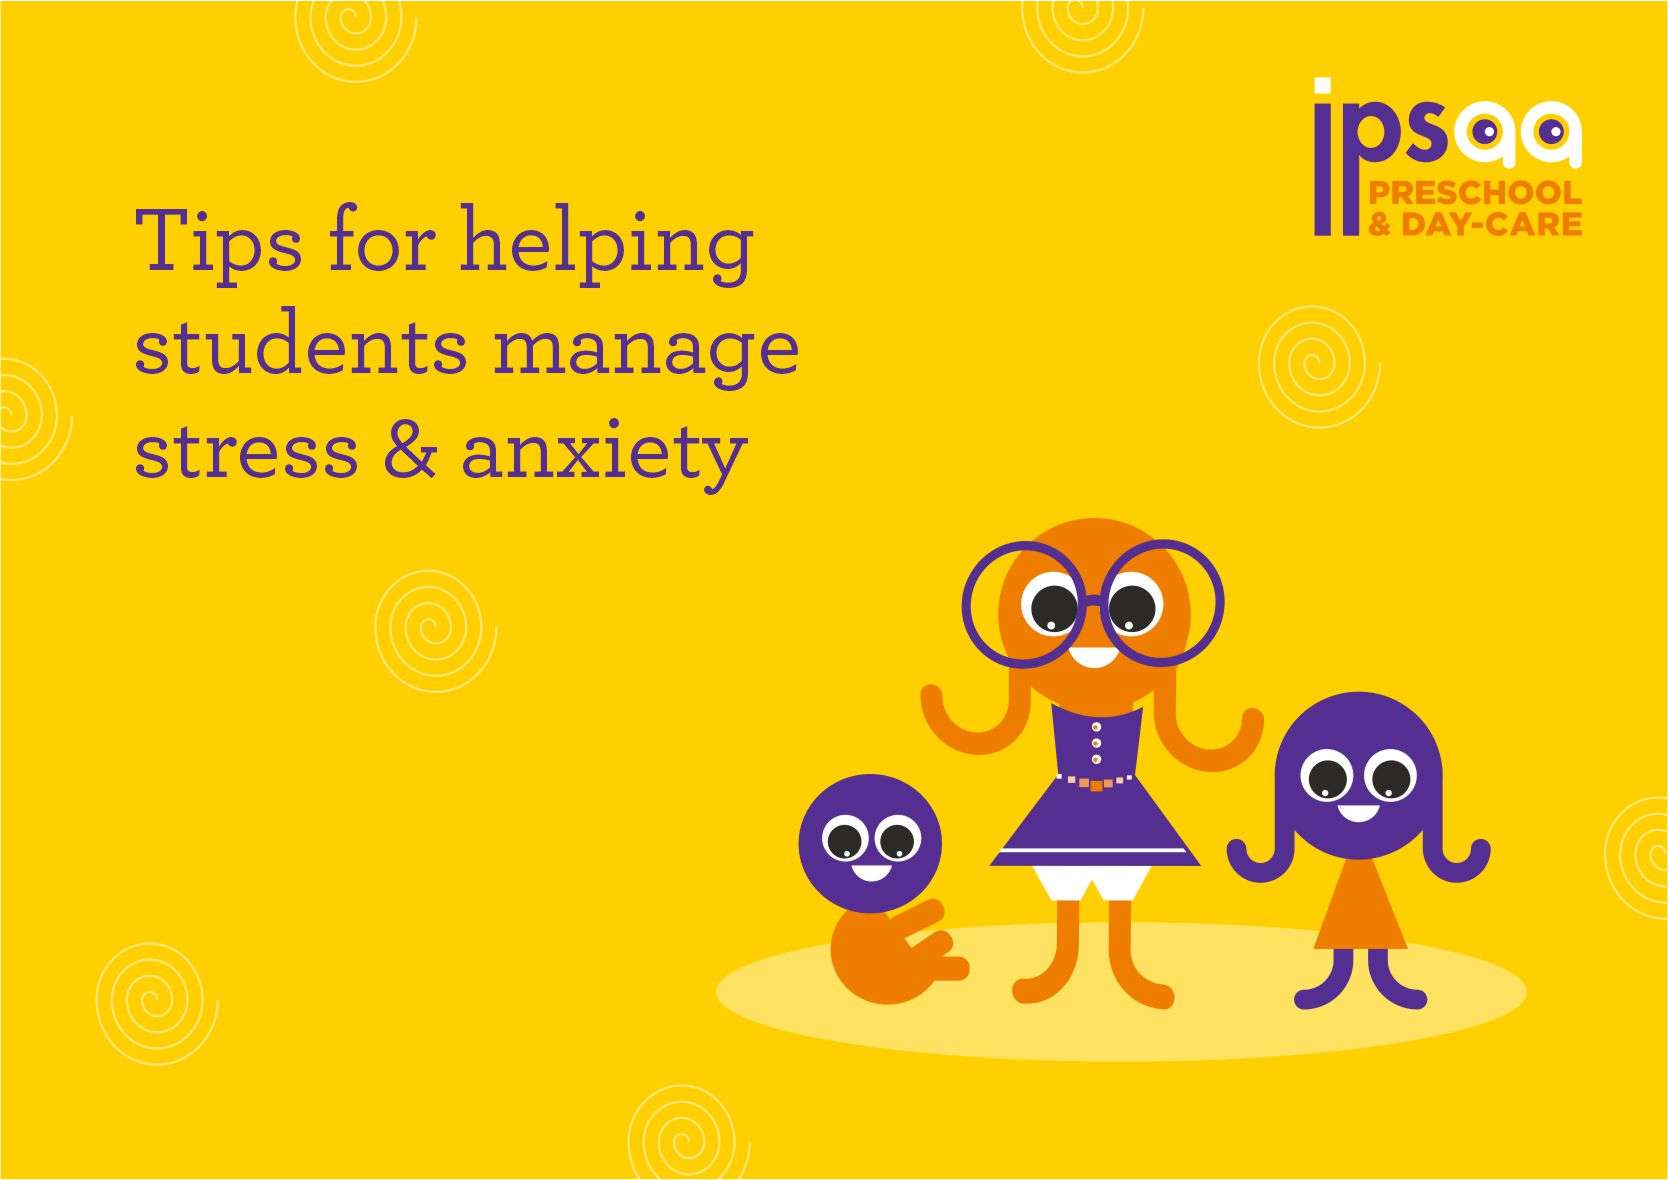 Tips for Helping School Students Manage Stress and Anxiety